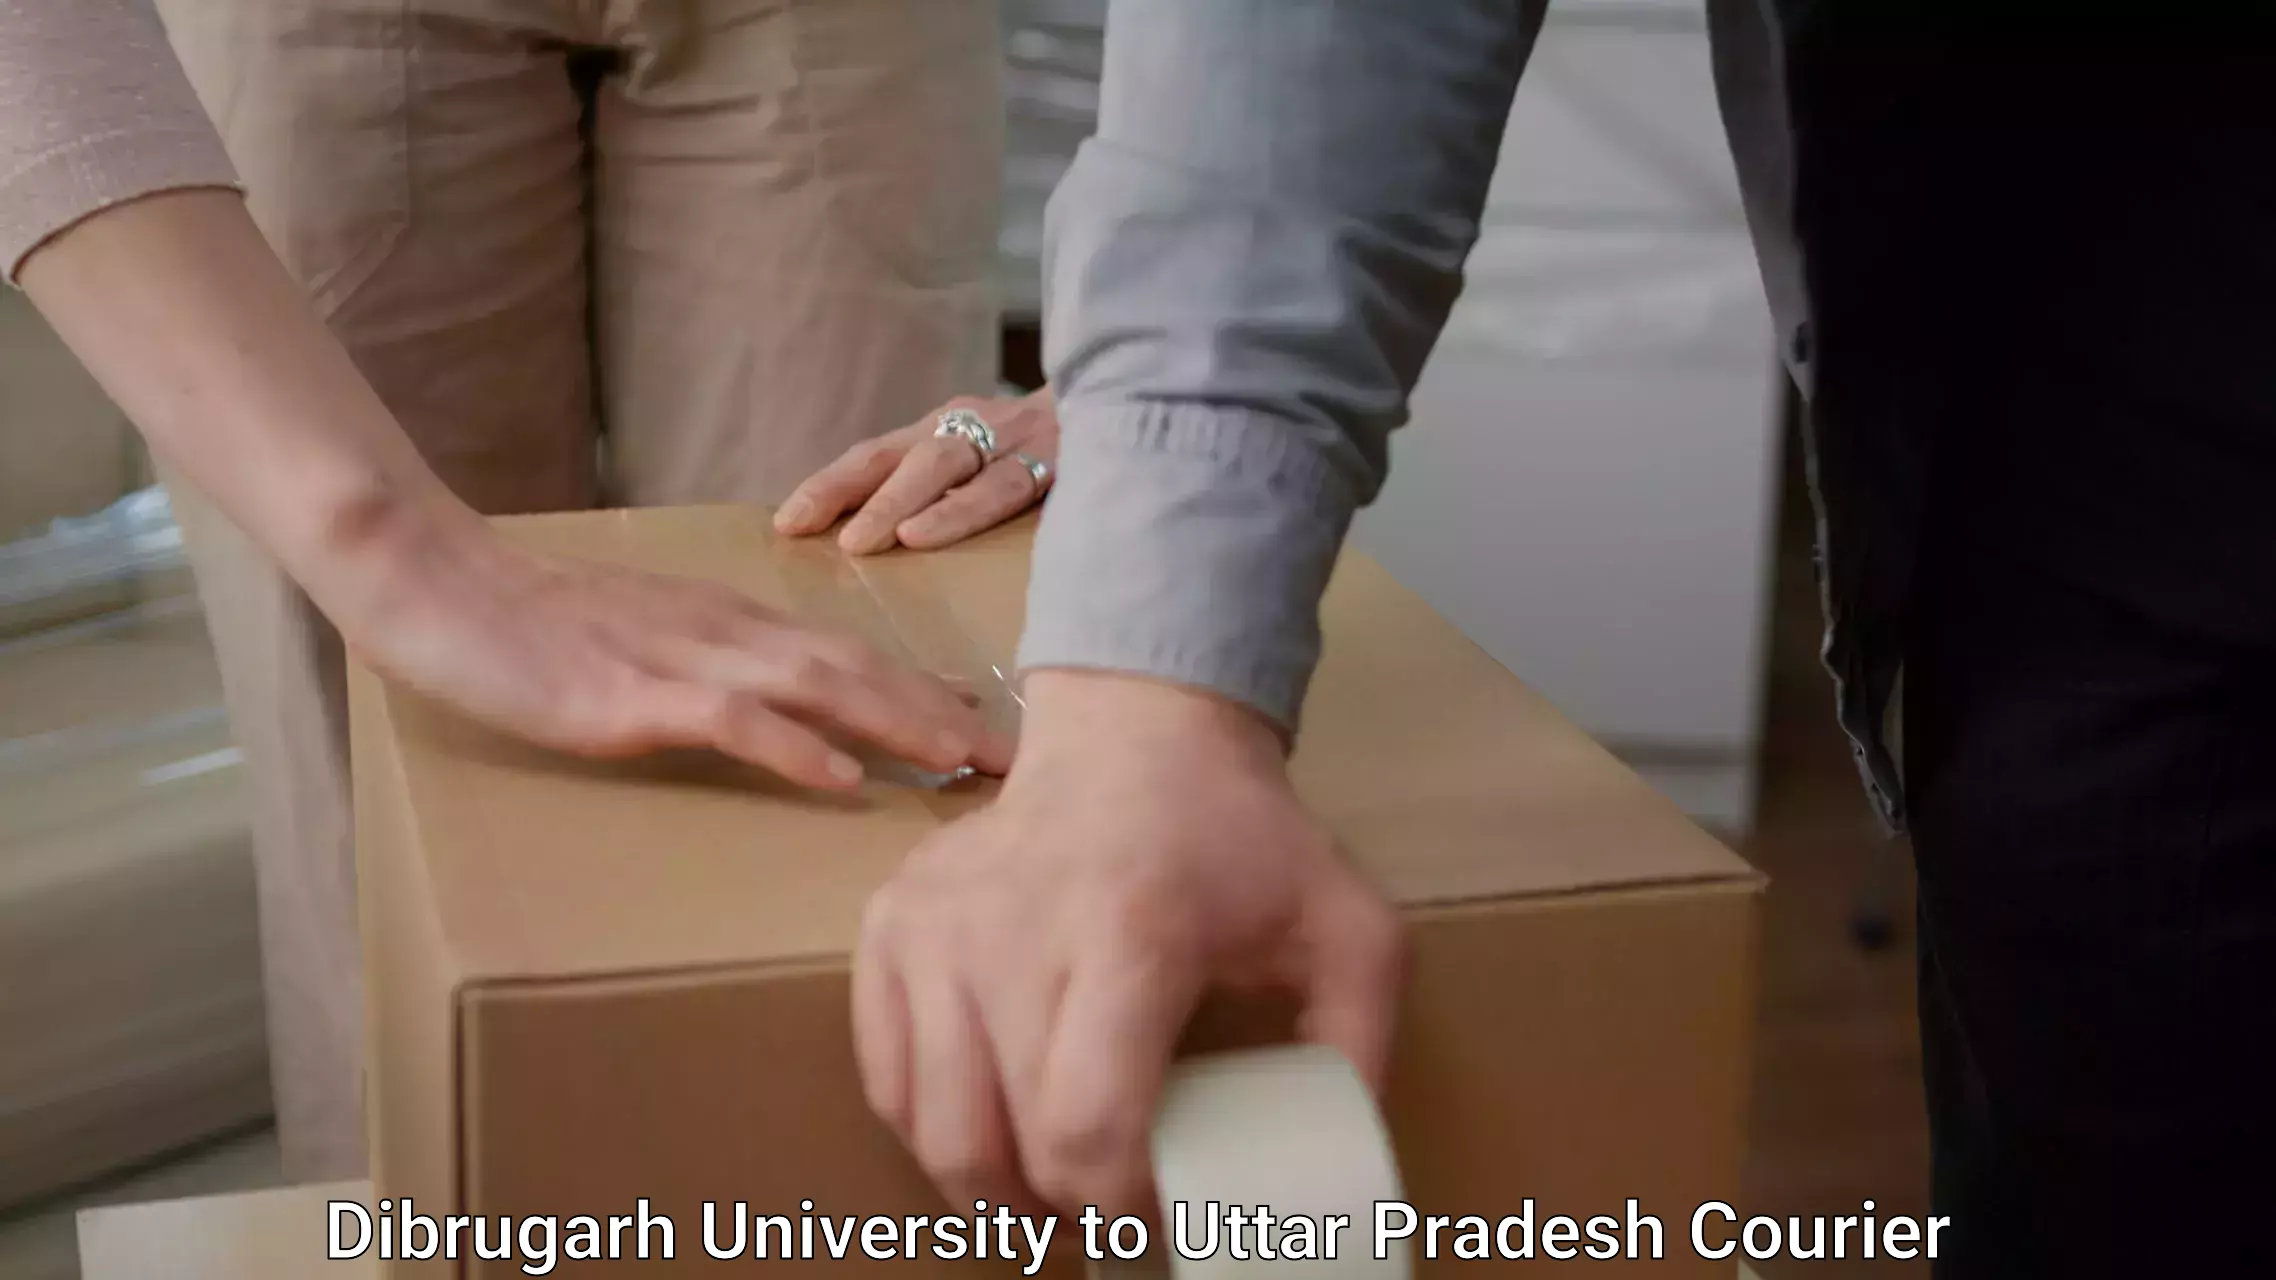 Furniture relocation services in Dibrugarh University to Kulpahar